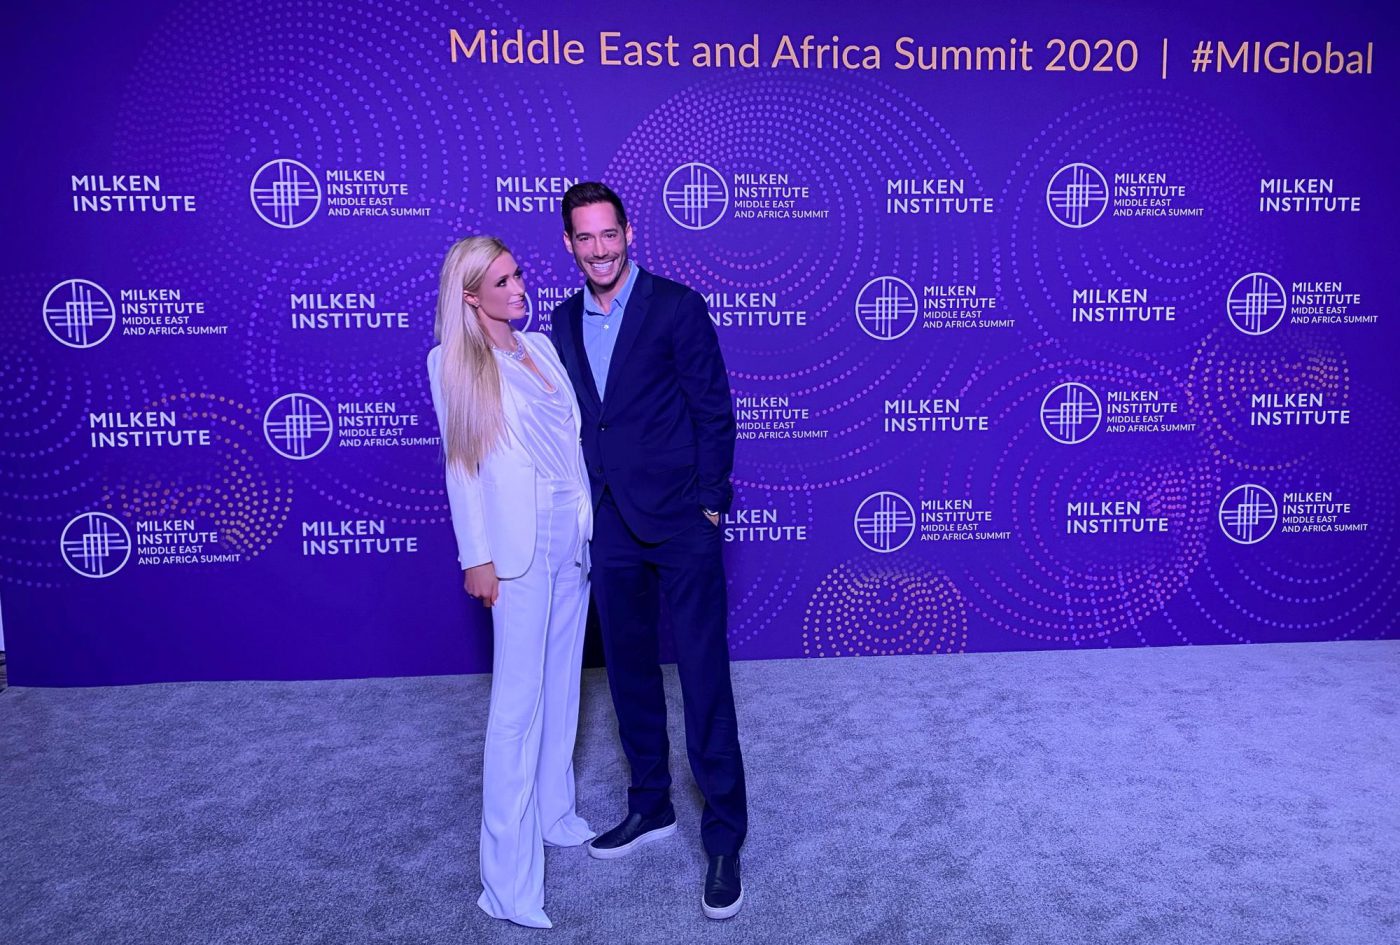 Paris and Carter at the Milken Institute Middle East and Africa Summit